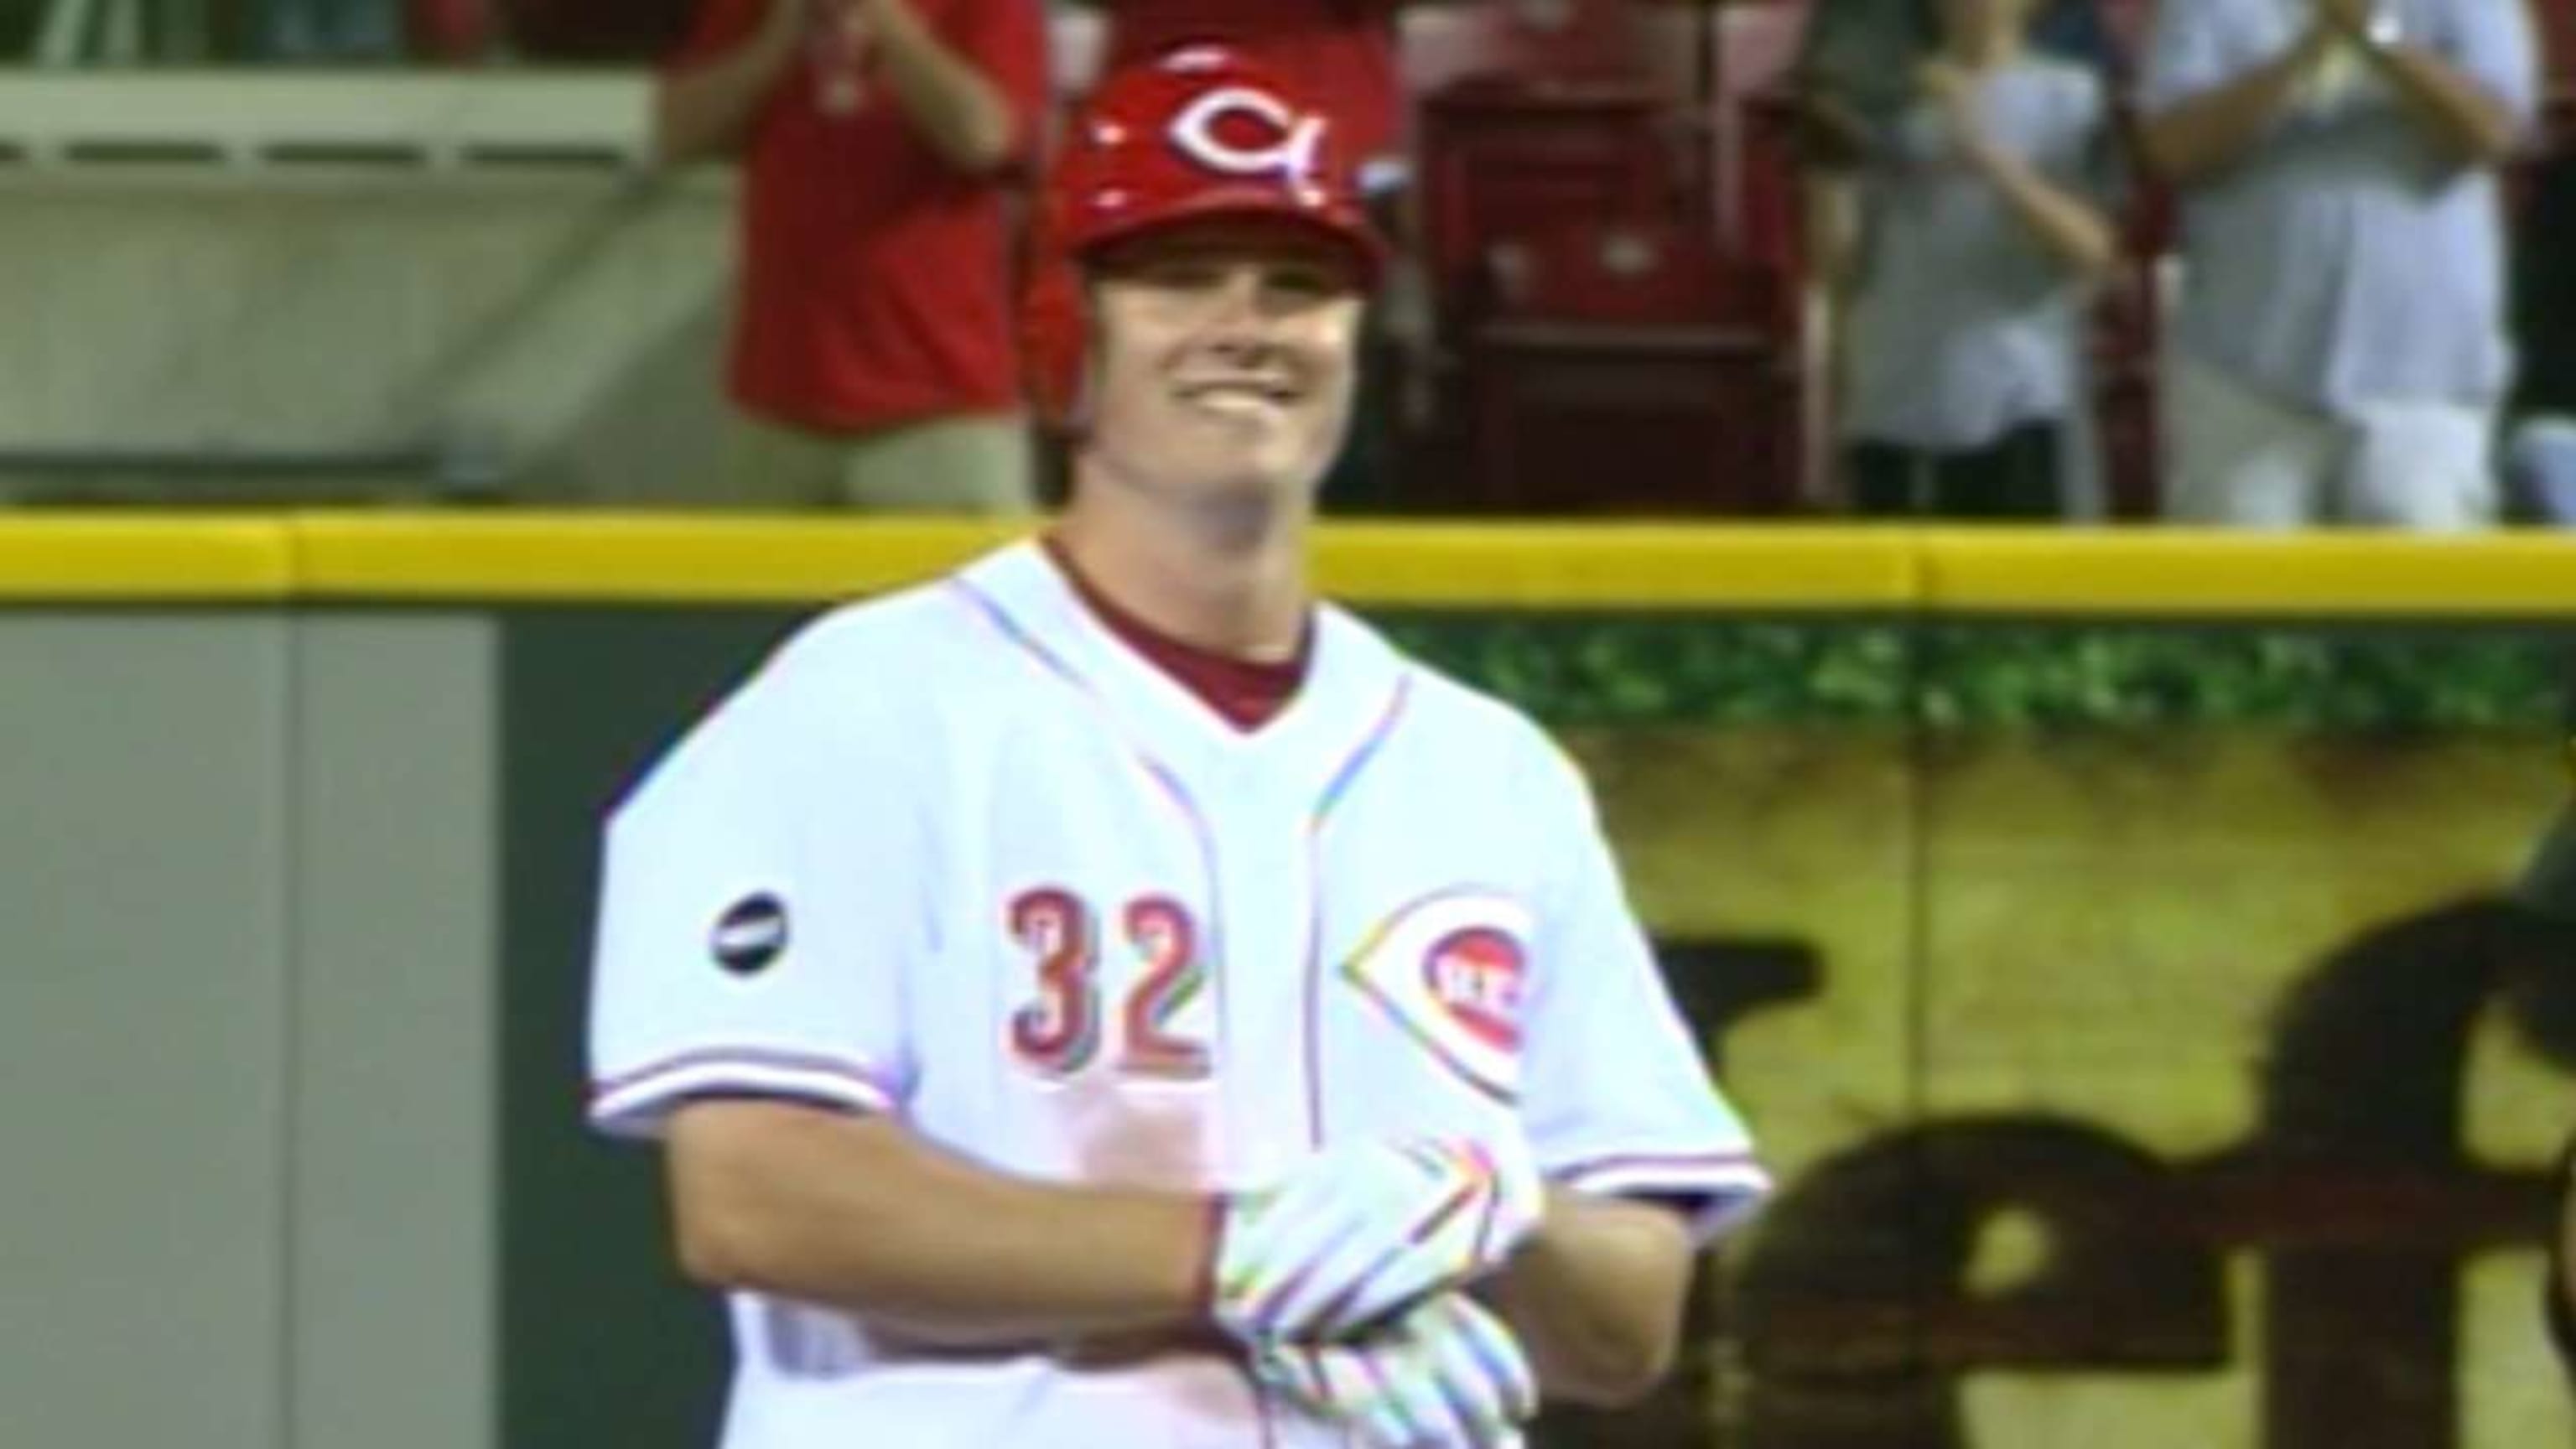 Former Reds All-Star retires, per report